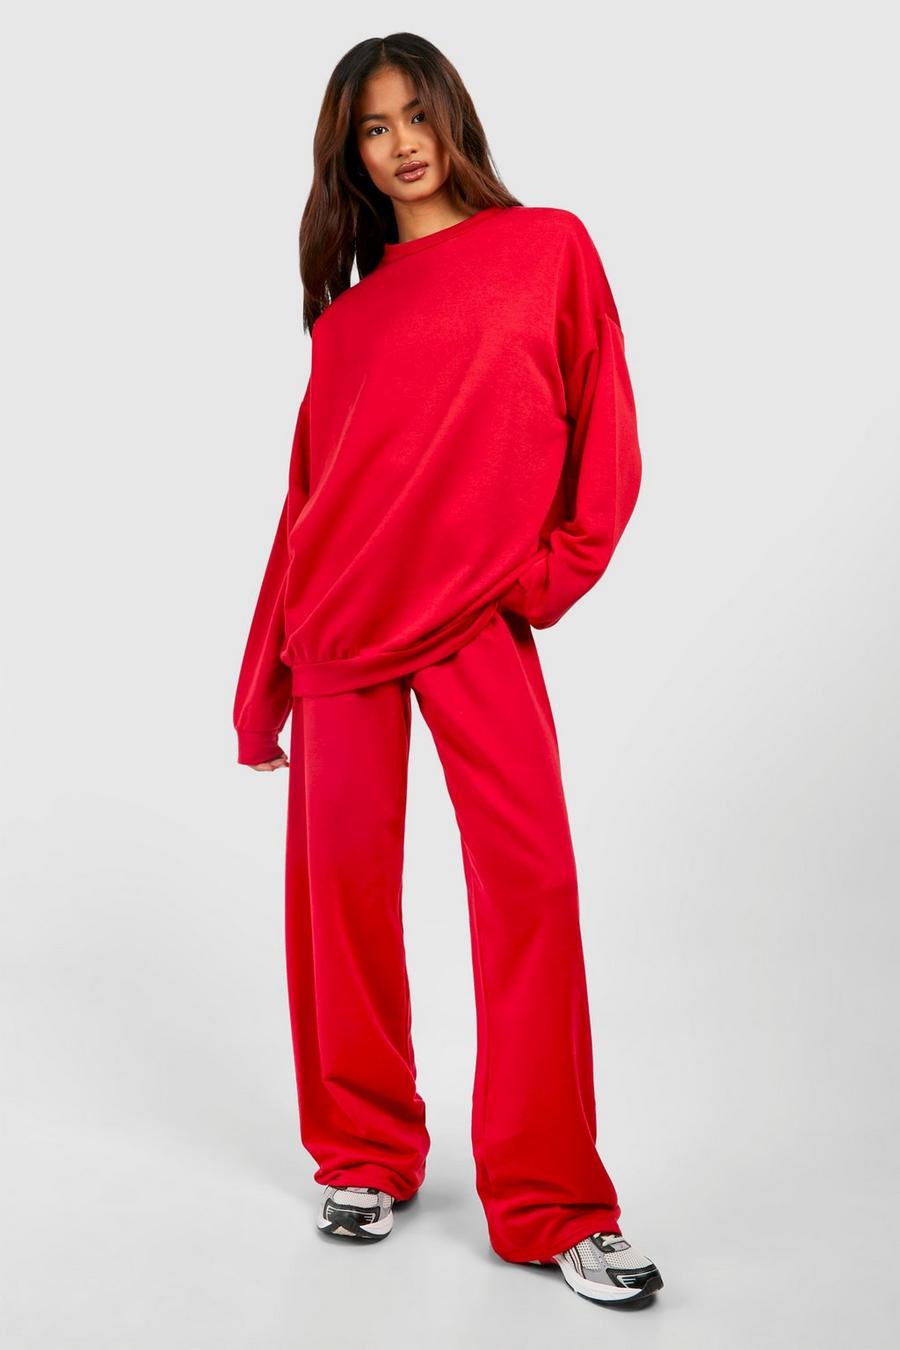 Insanely Comfy Tall Sweatsuit Set from Liv Tall